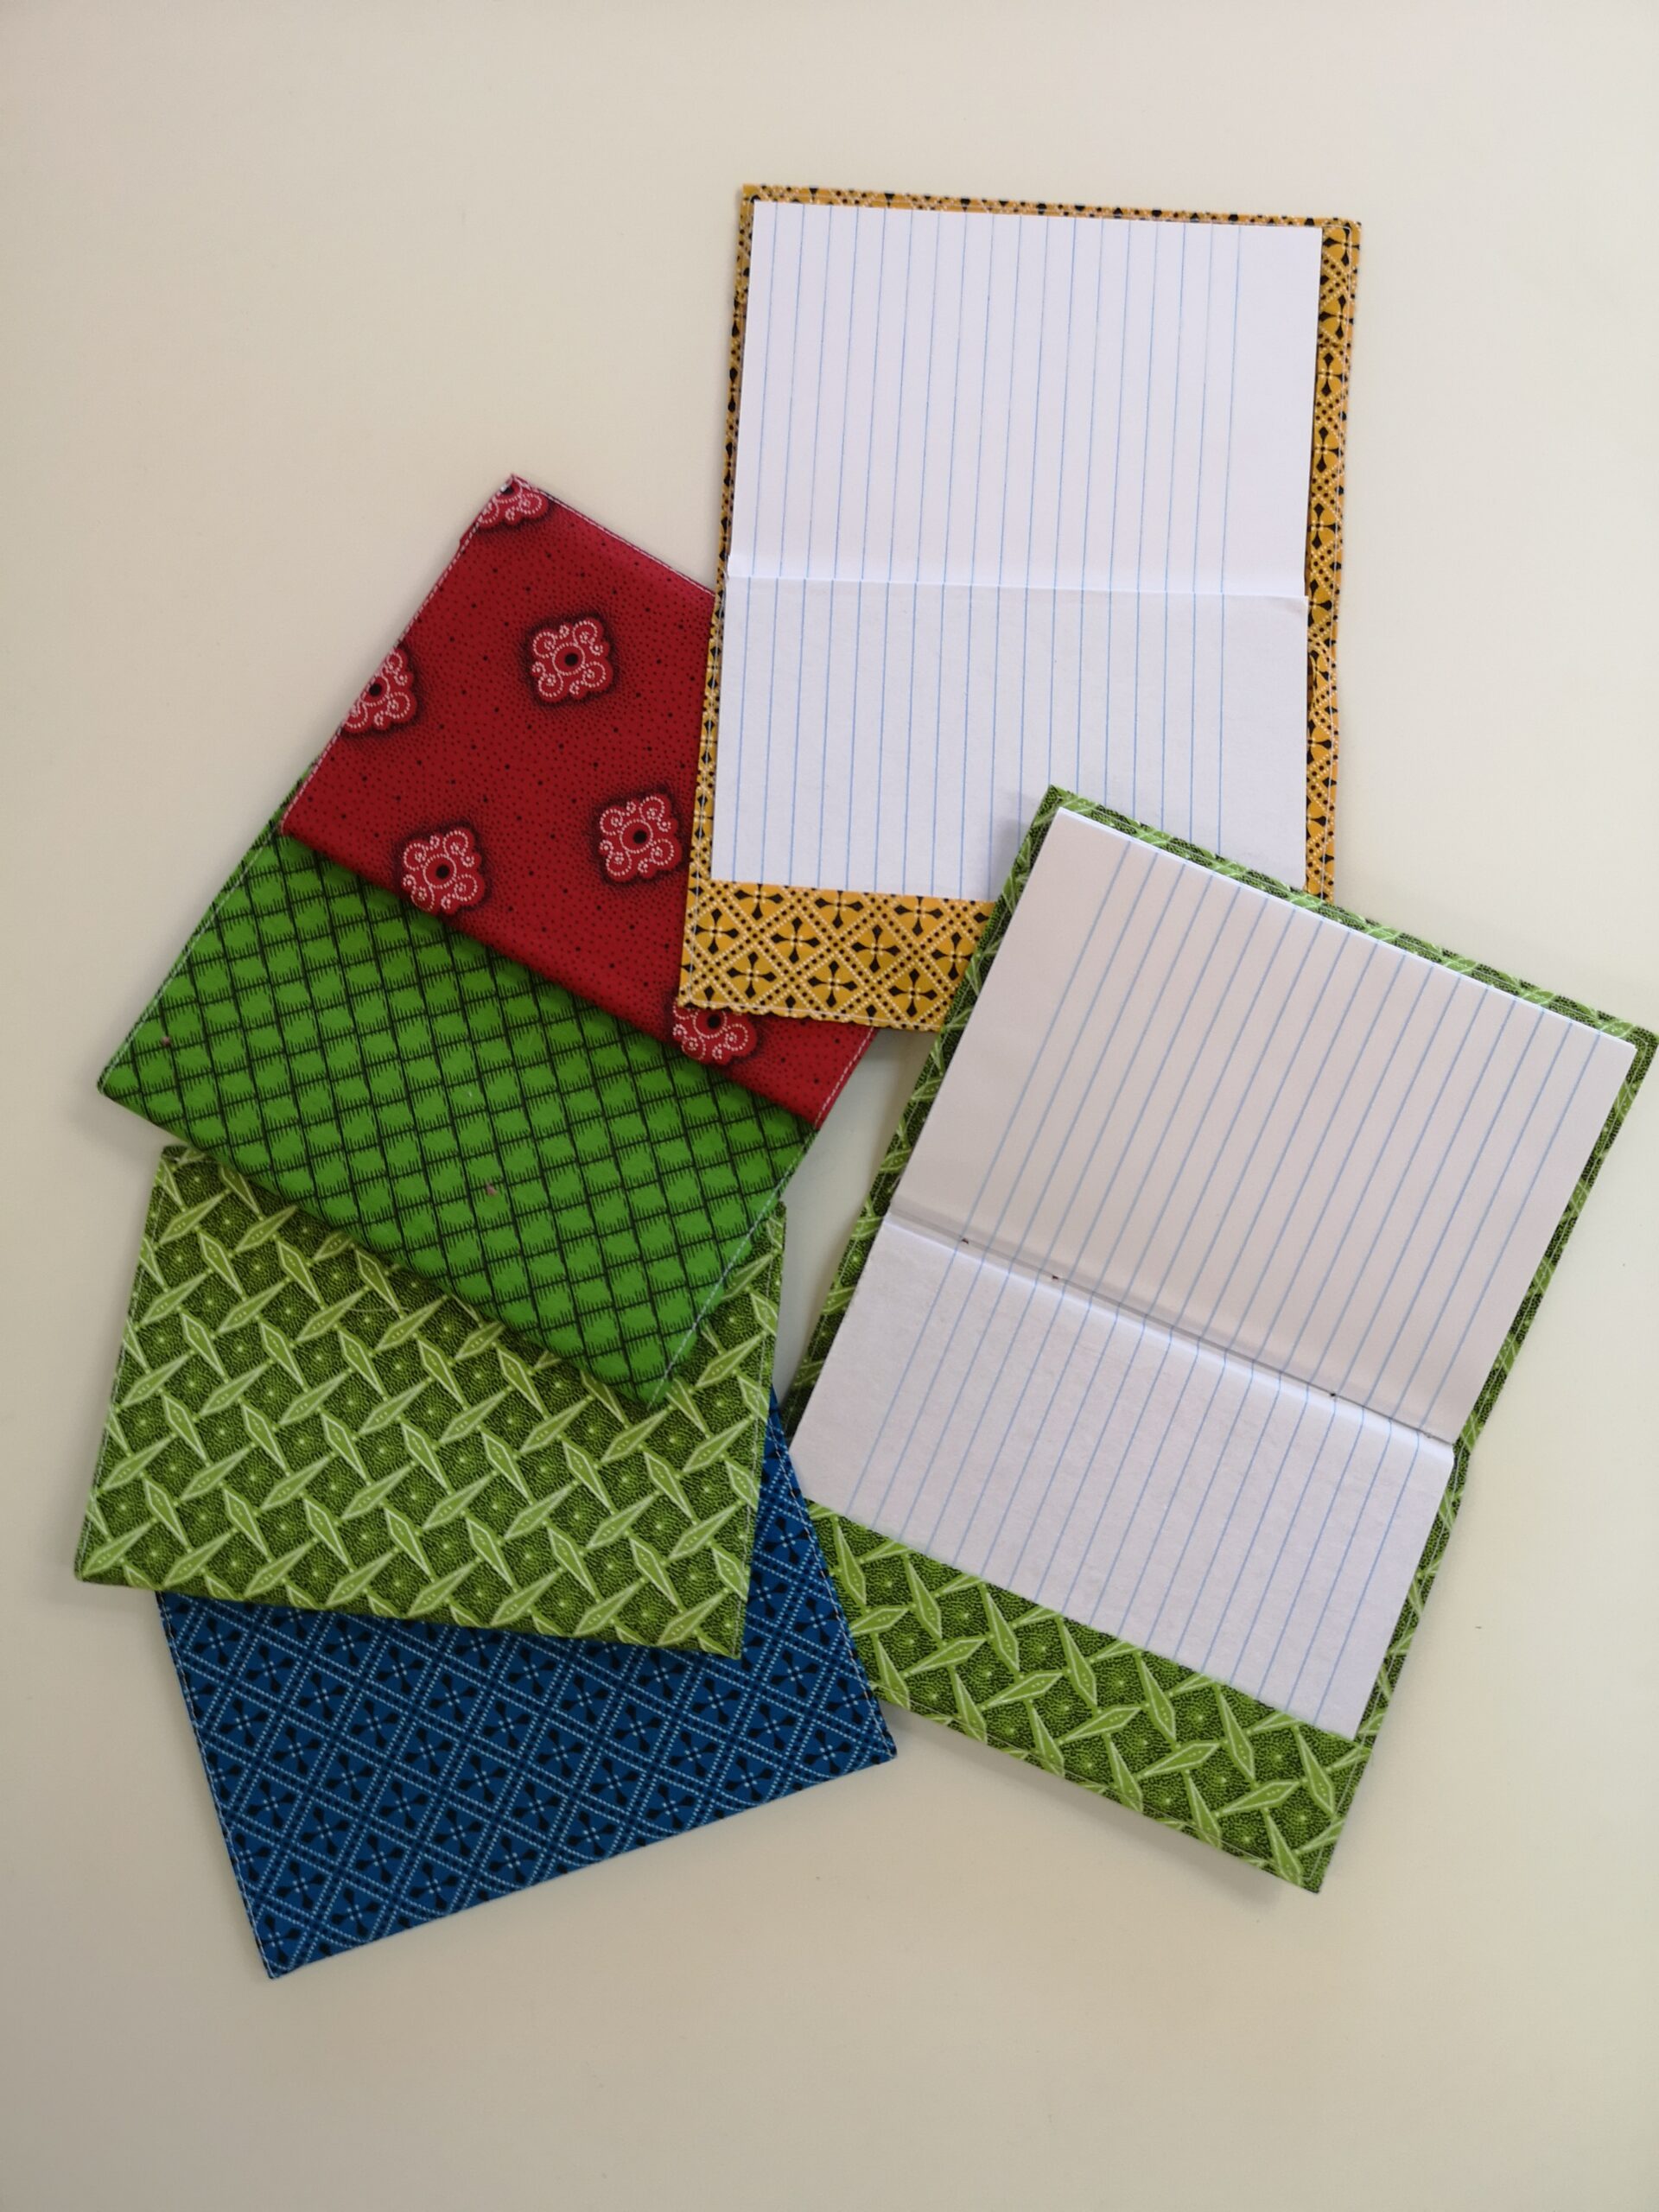 Shwe-shwe notebooks (removable covers)